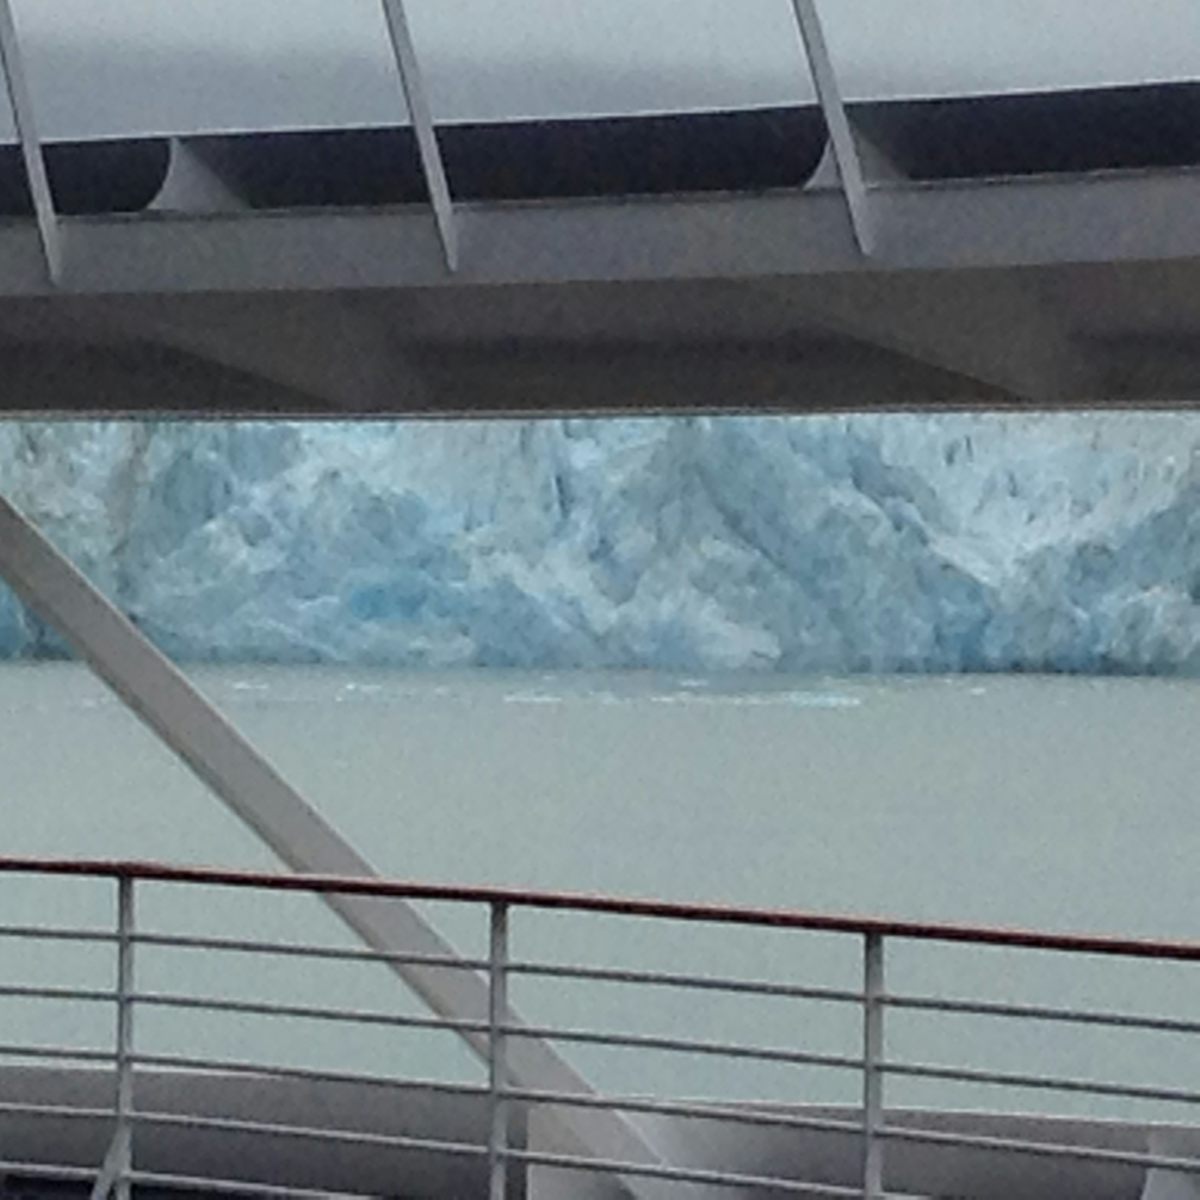 Glacier viewing from our balcony